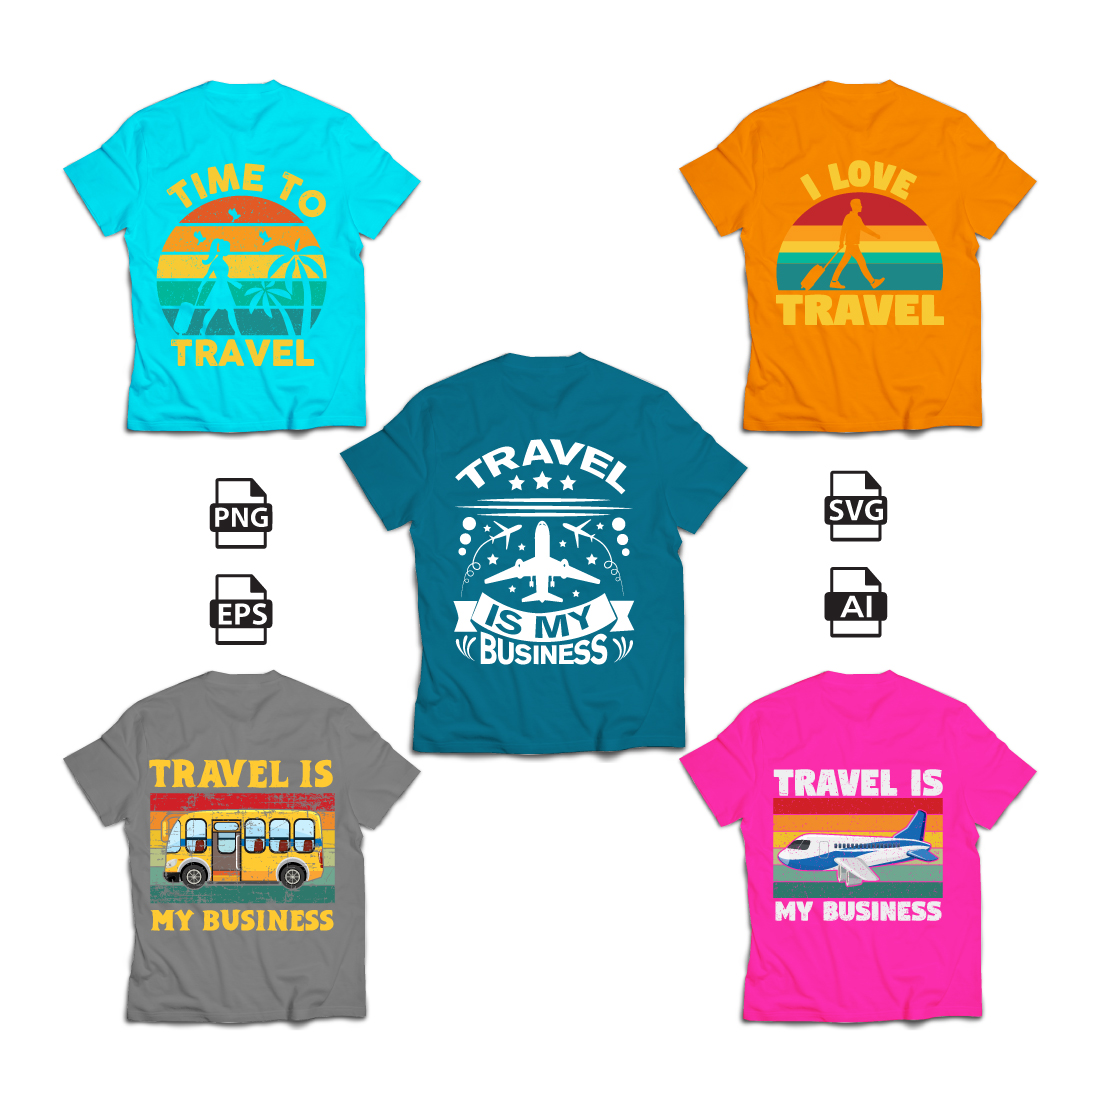 Travel Is My Business Typography T-Shirt Design cover image.